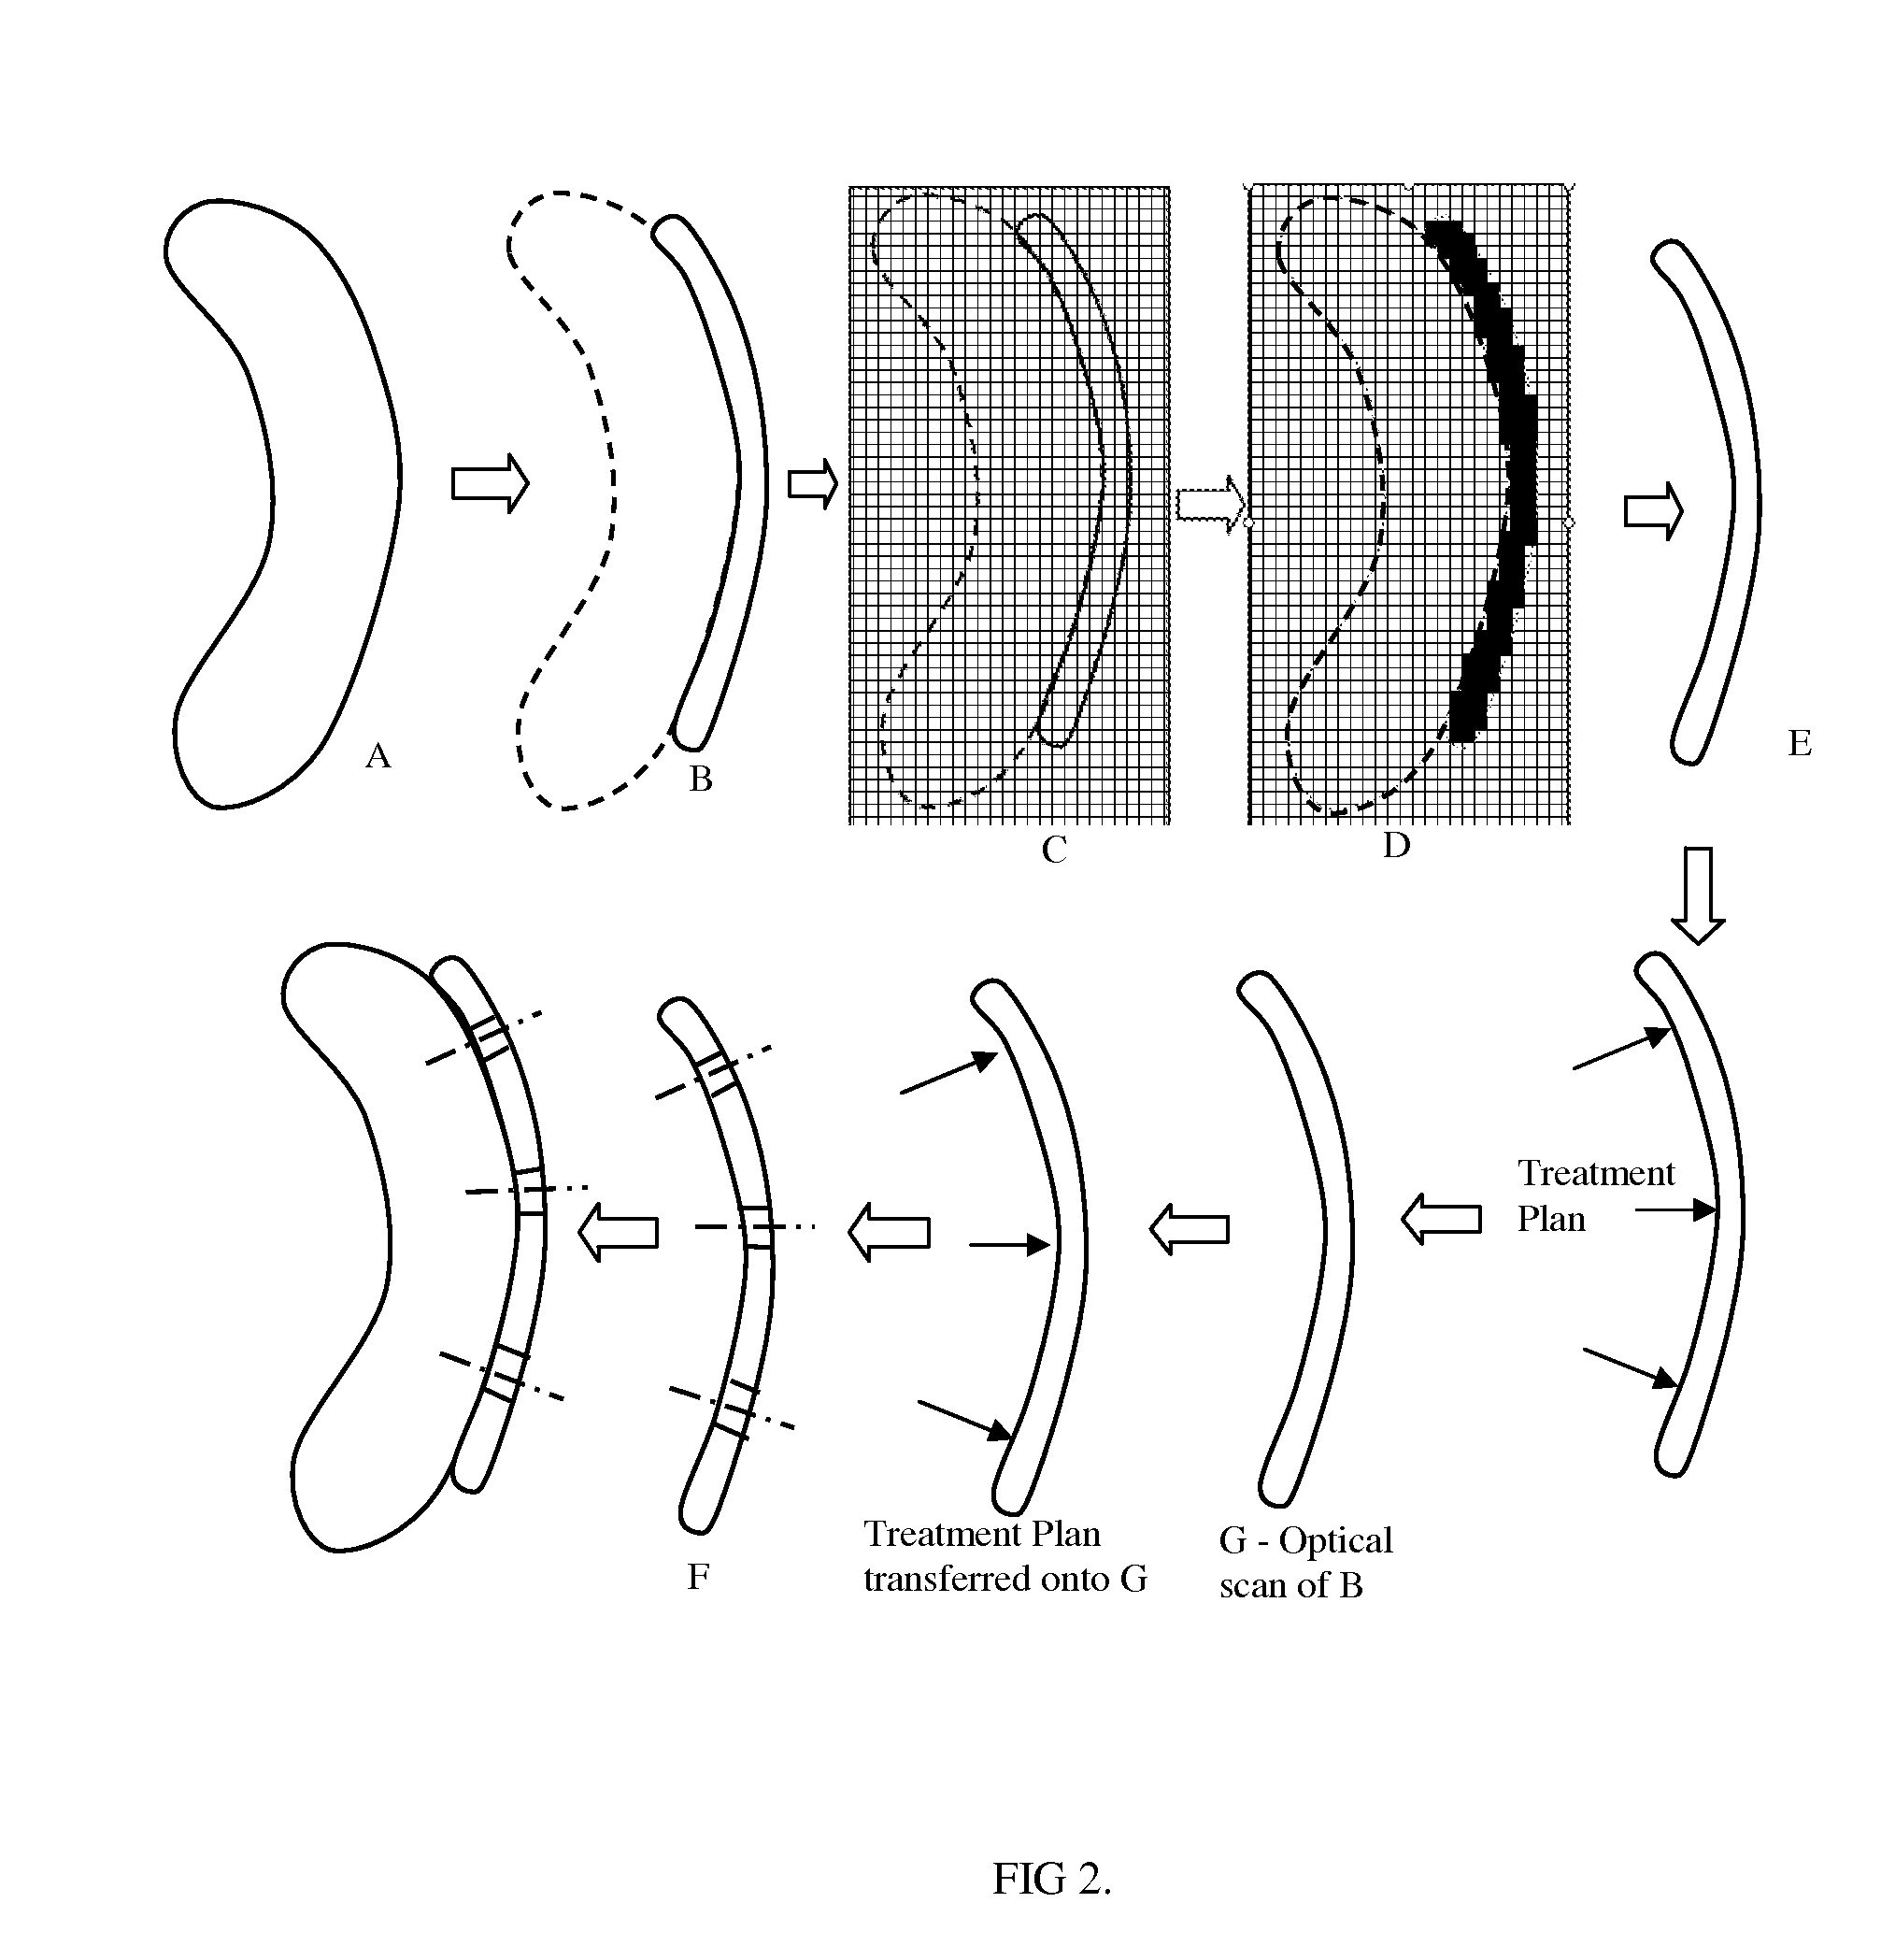 Design method of surgical scan templates and improved treatment planning